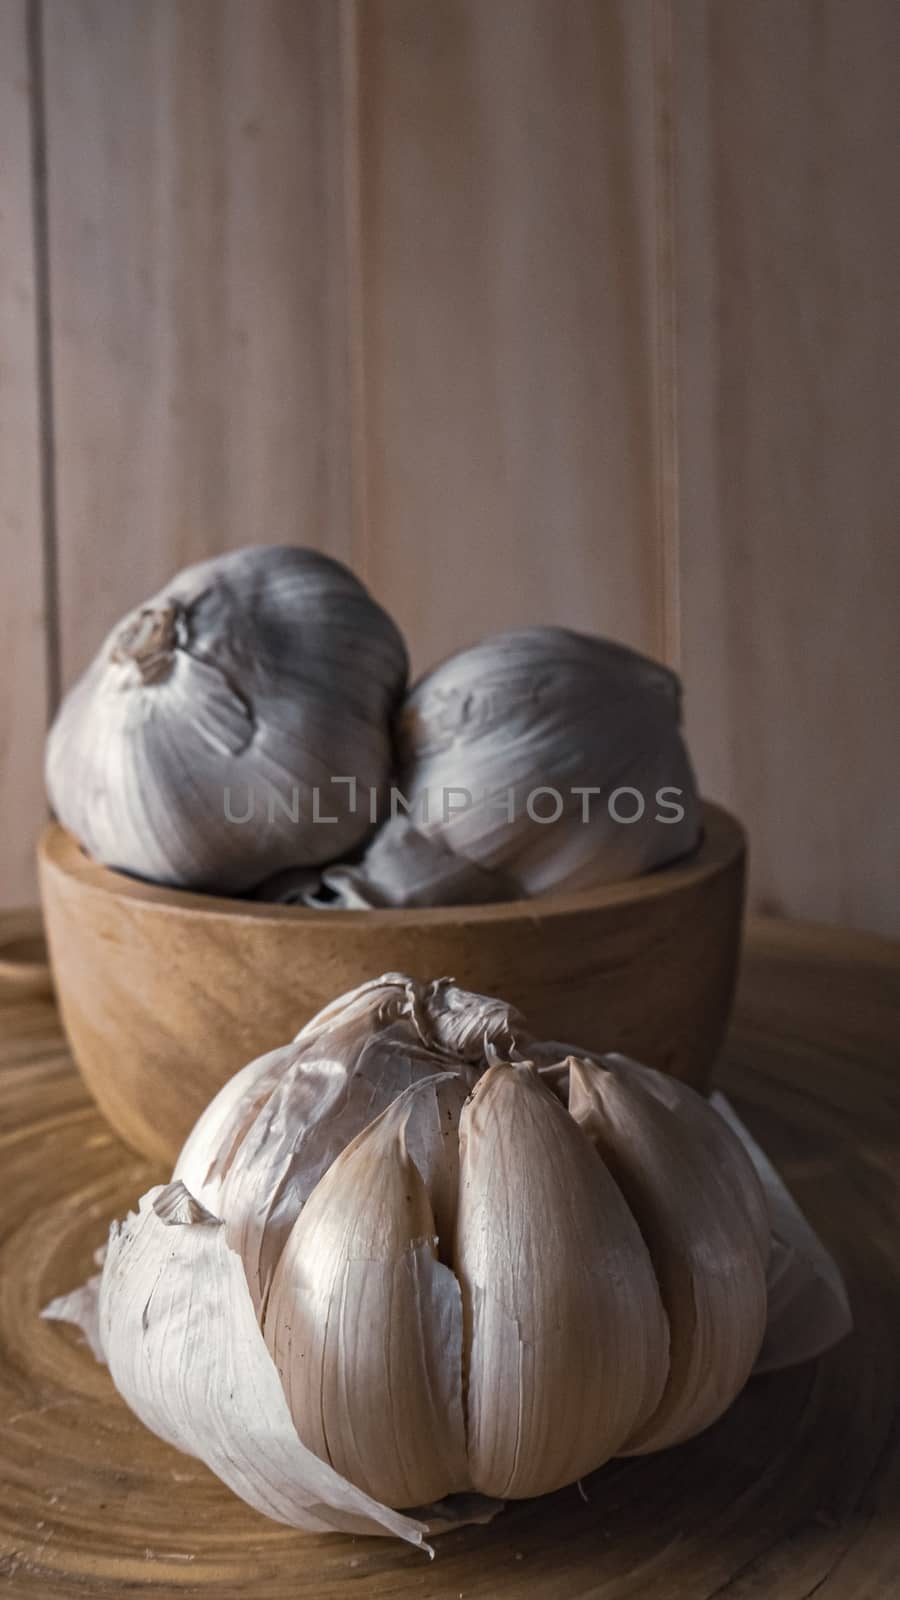 The garlic in wood bowl  on wood table for food content.